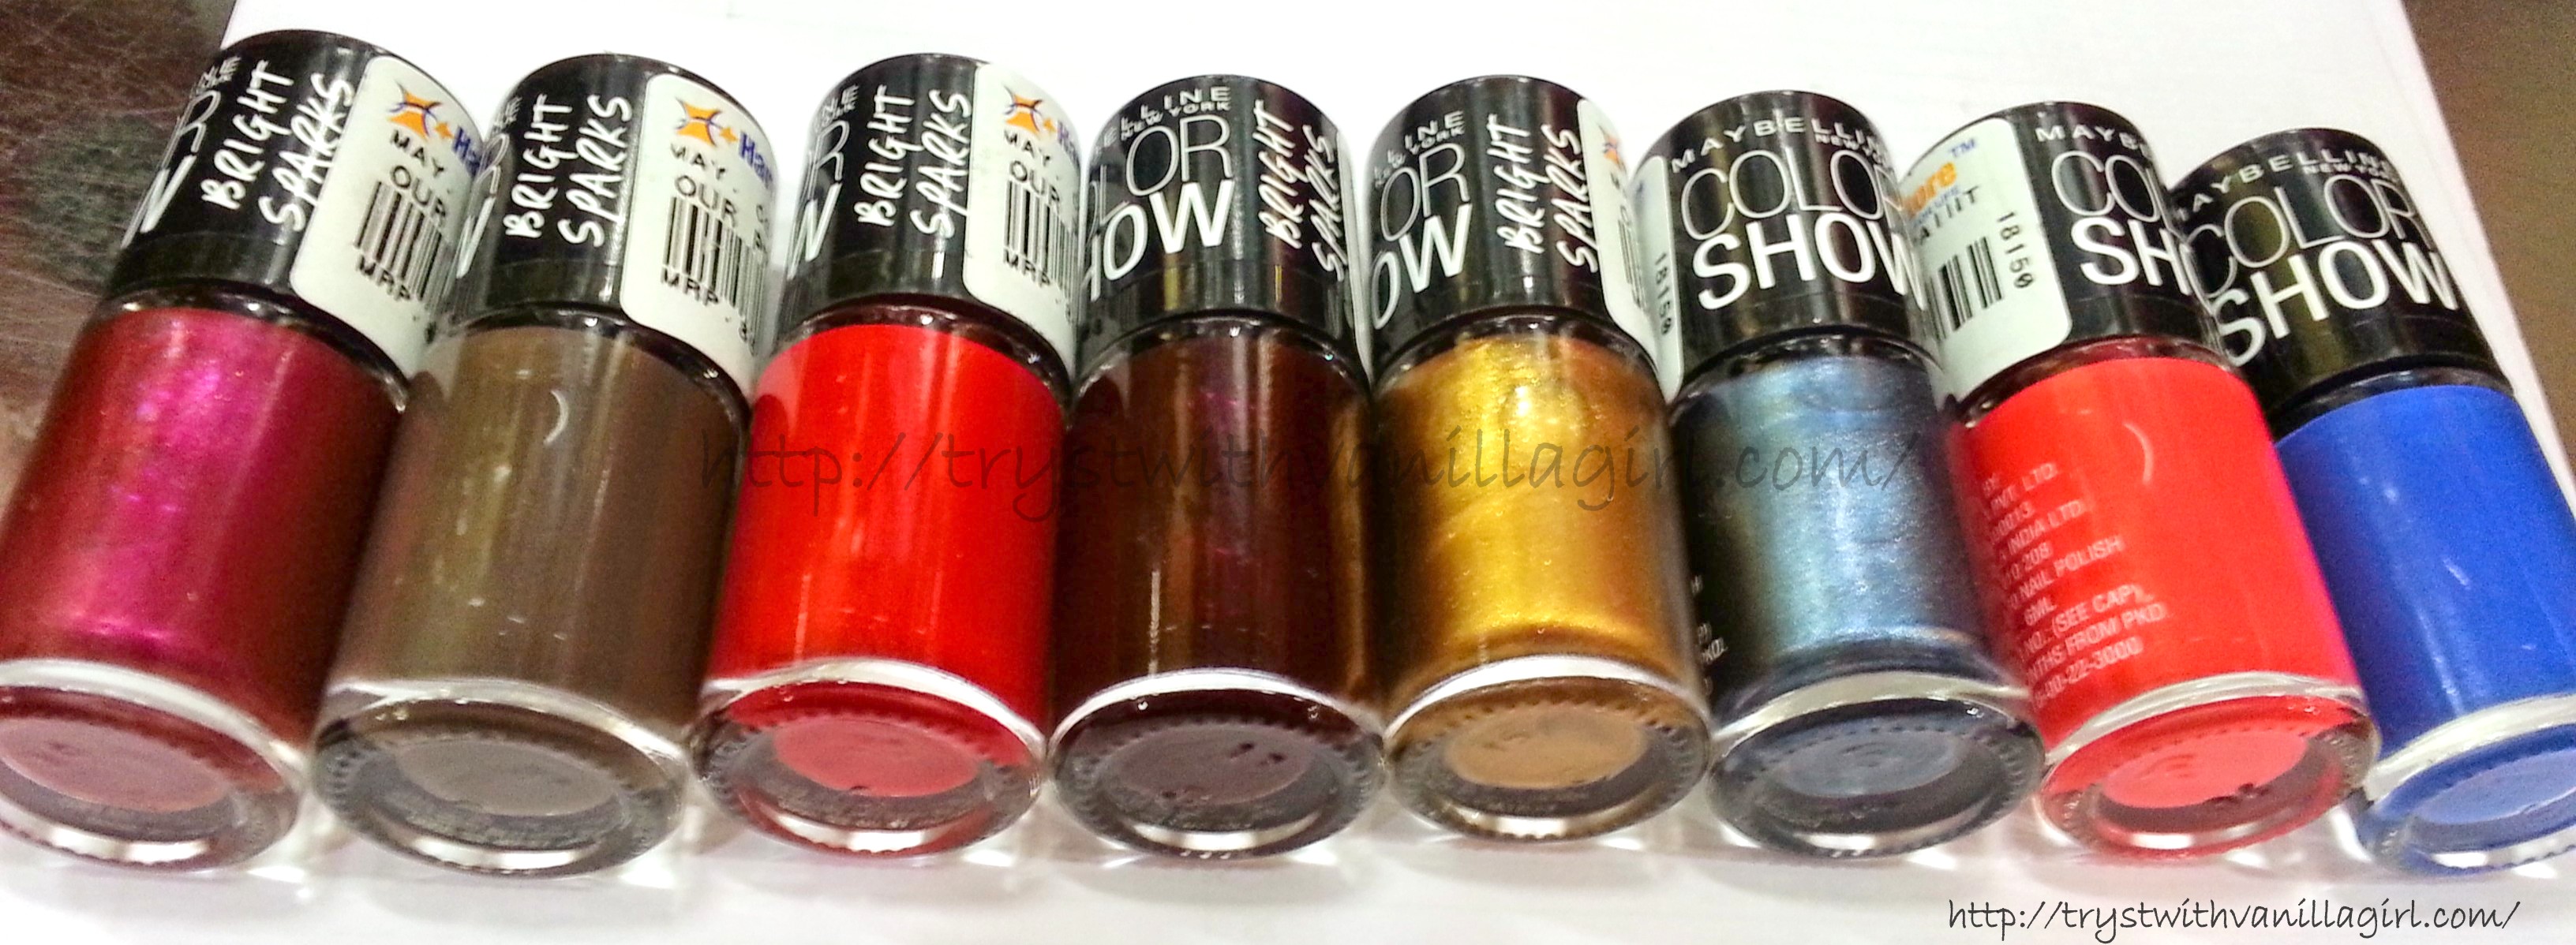 NEW MAYBELLINE COLOR SHOW BRIGHT SPARK NAIL COLOURS